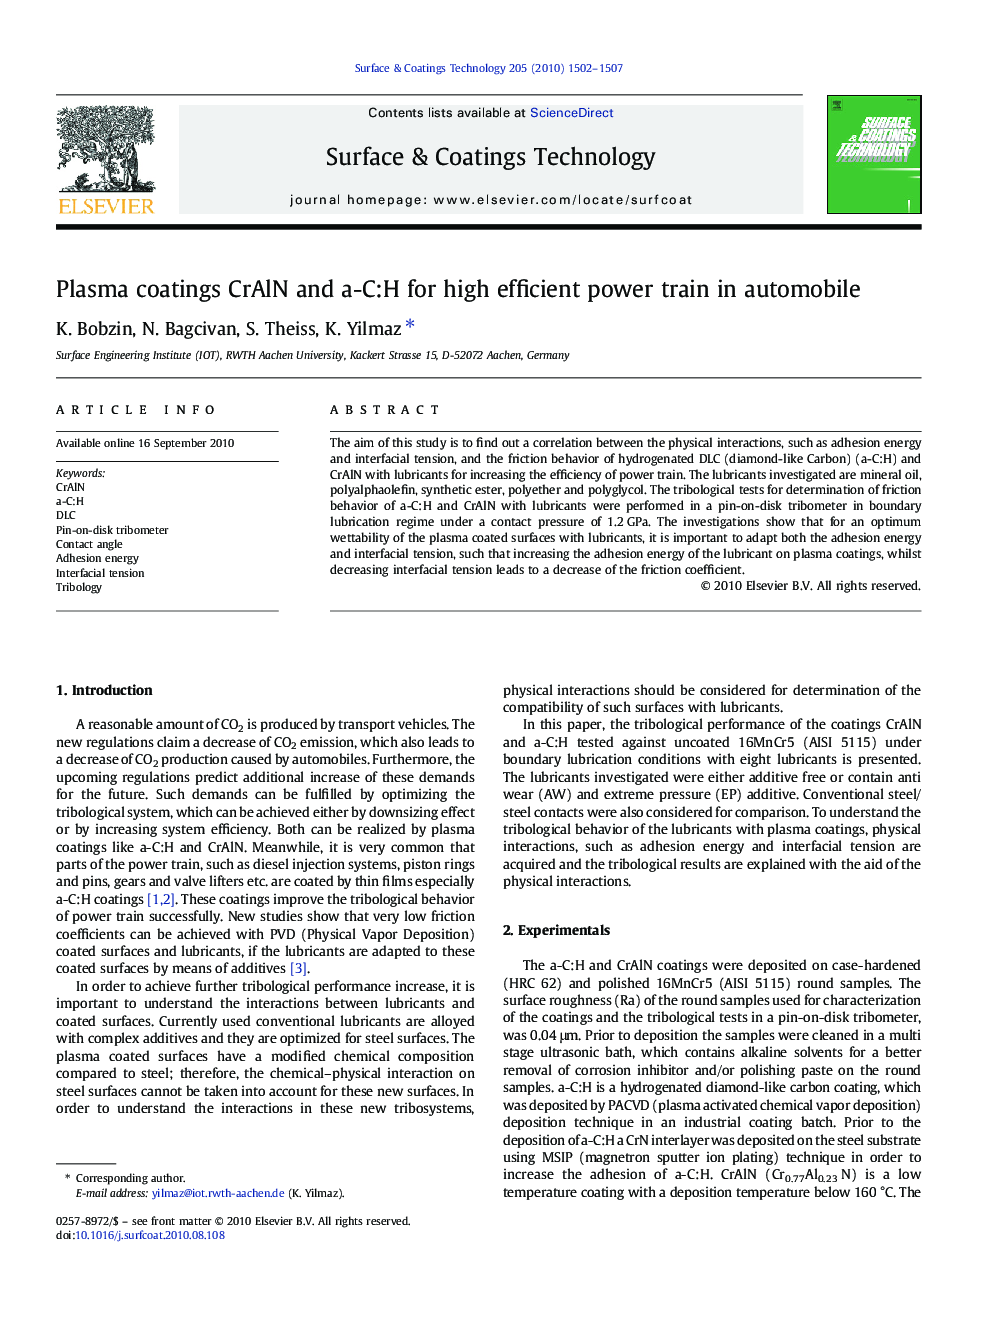 Plasma coatings CrAlN and a-C:H for high efficient power train in automobile